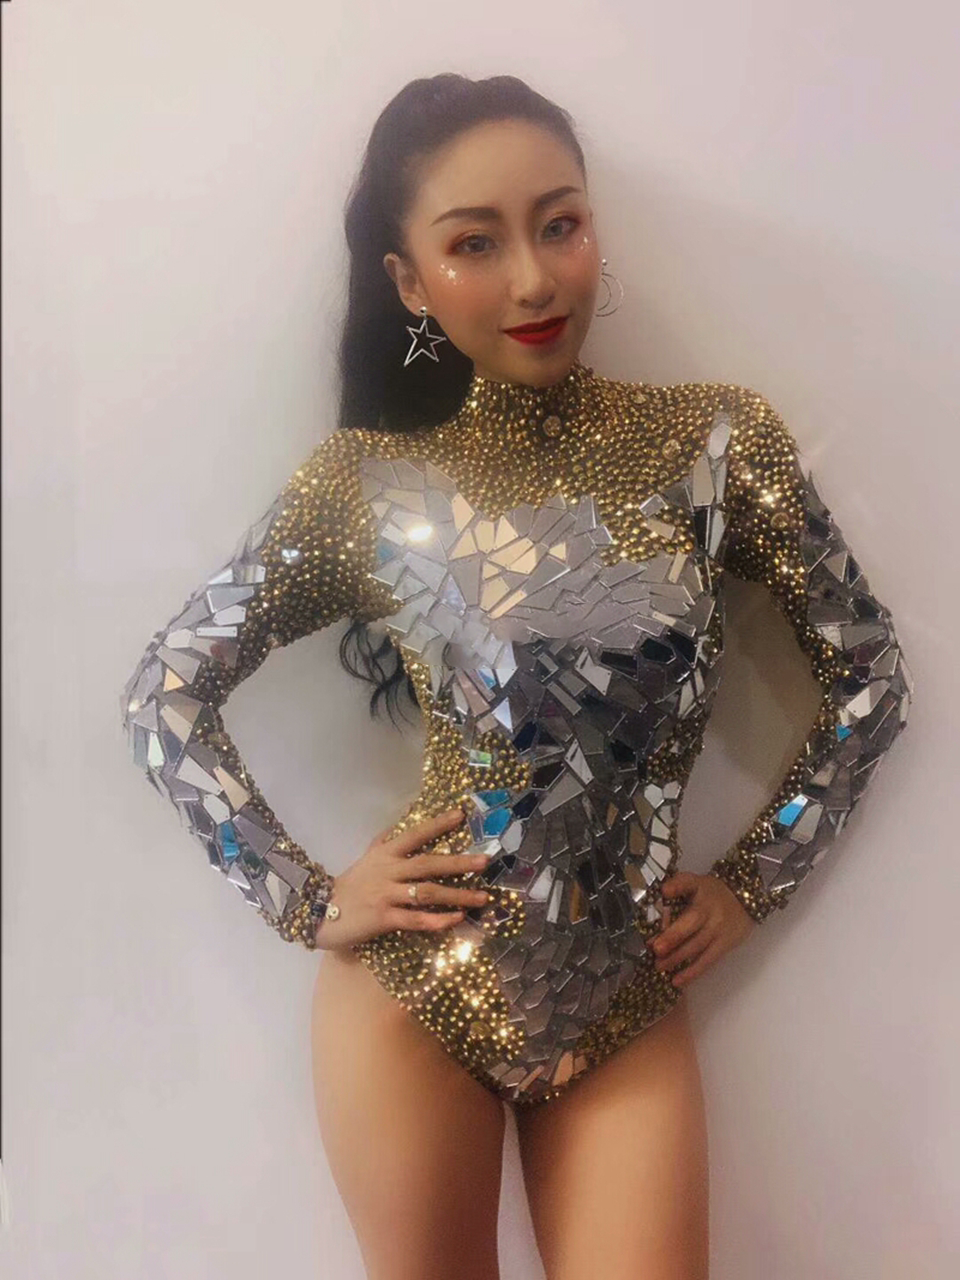 Shining Gold Rhinestones Mirrors Bodysuit Women's Birthday Celebrate Party Outfit DS Bar Singer Dancer Show Performance Costume